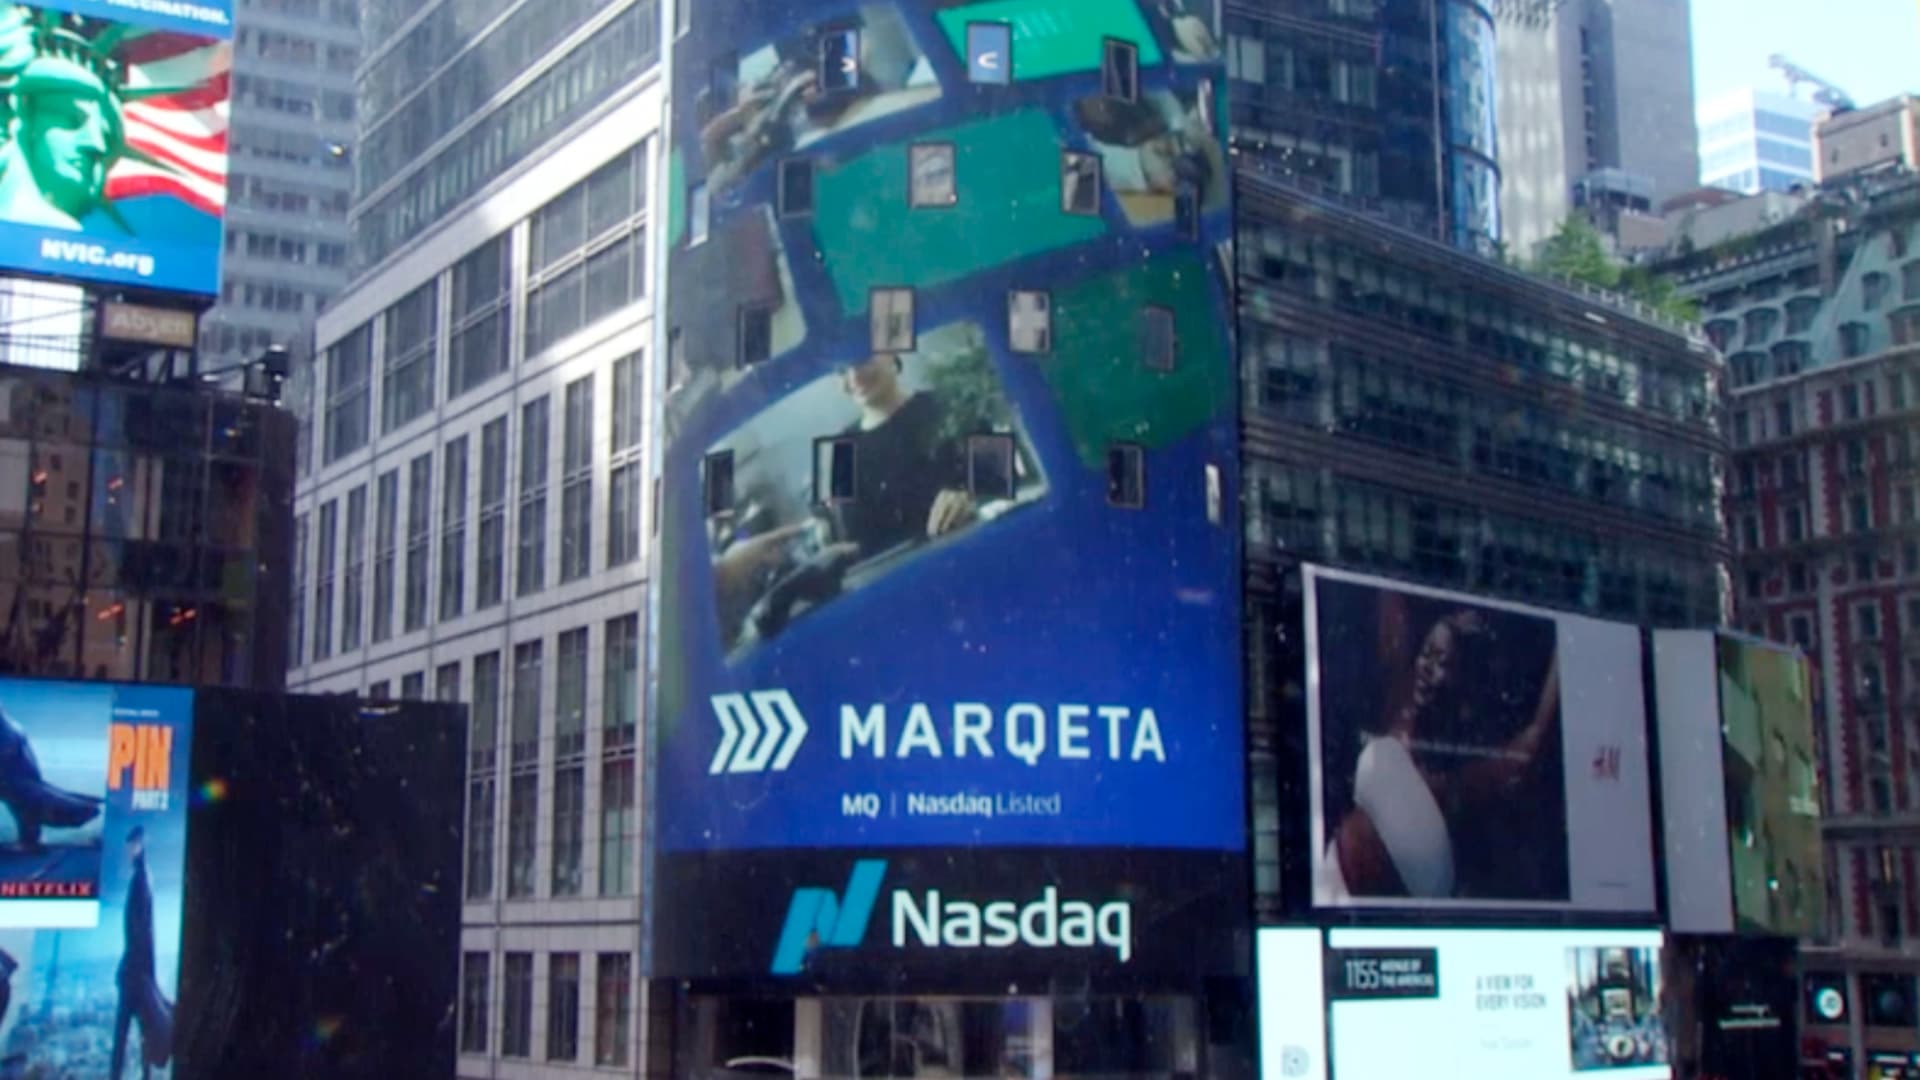 Card issuer Marqeta is a buy and can go up 54% from here, Morgan Stanley says